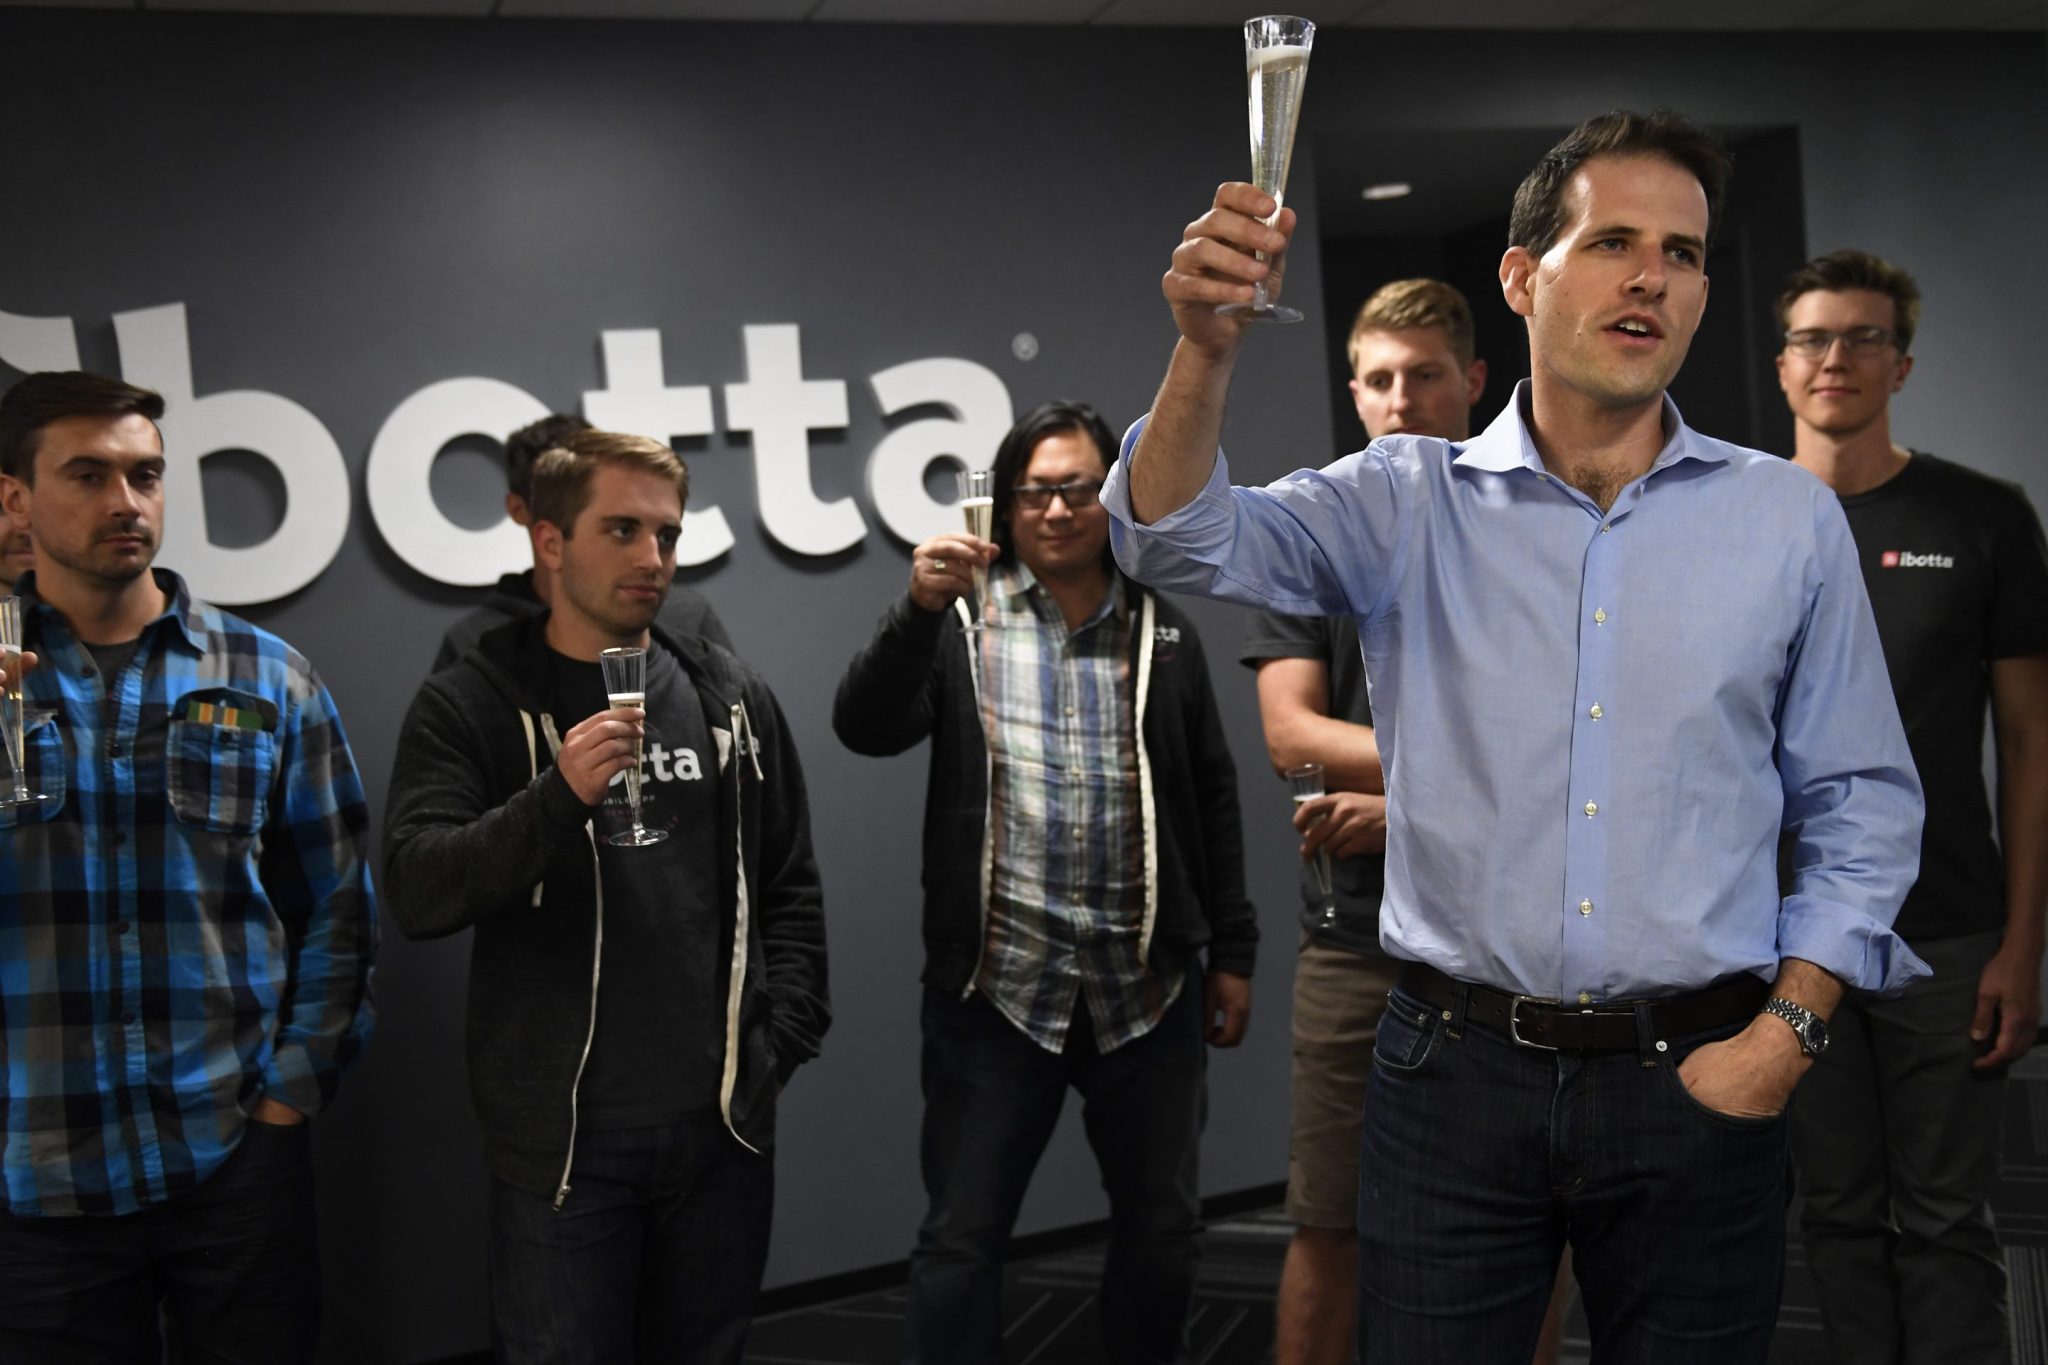 Walmart-backed Ibotta chasing $2.3 billion valuation as tech IPOs keep rolling after Astera Labs and Reddit